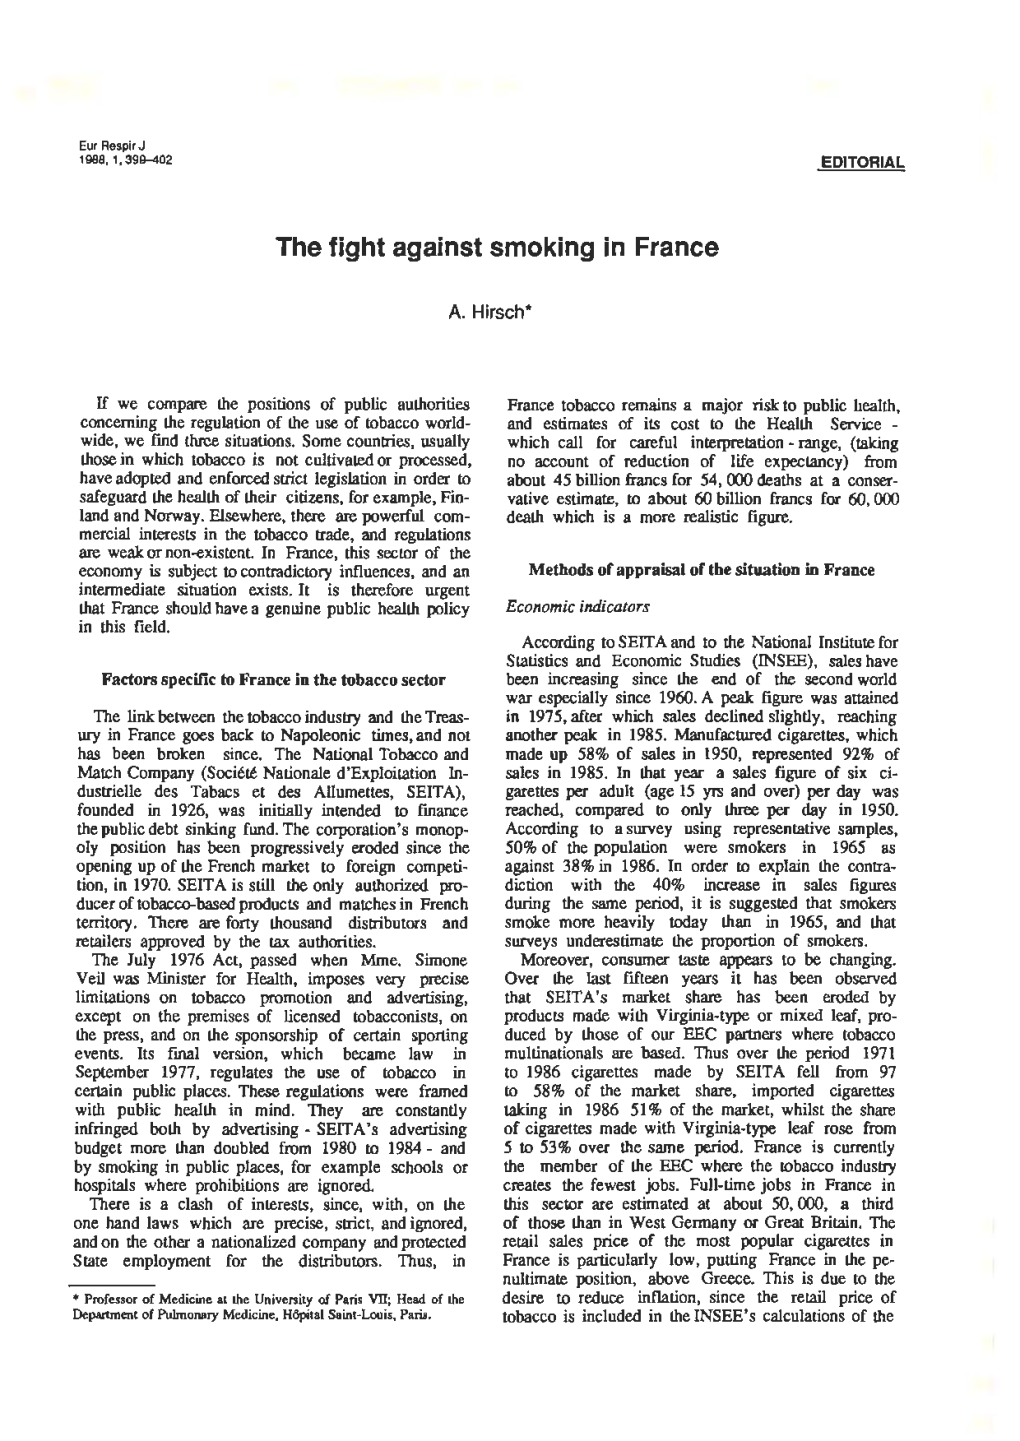 The Fight Against Smoking in France